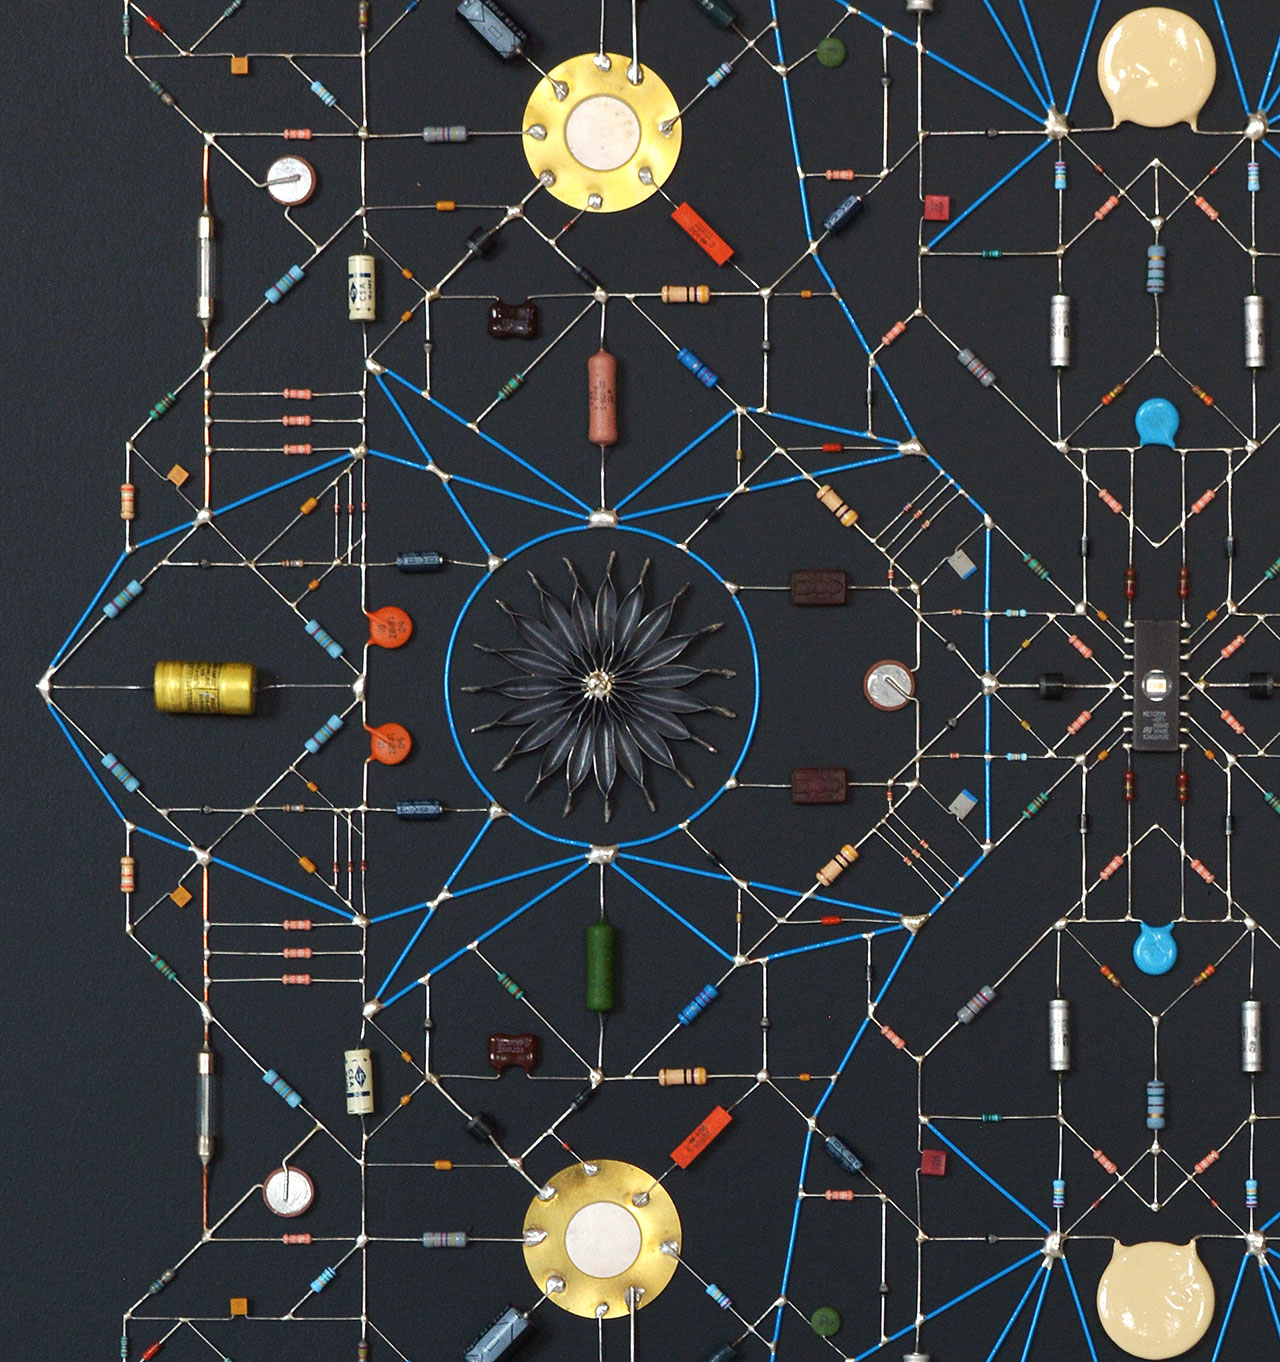 Technological Mandala 101 (close up), 2019. Electronic components, copper wires, varnish, lead, paper, acrylic paint, mdf, framed,  84x84x5,5 cm | 33x33x2¼  inches. Courtesy: The Flat – Massimo Carasi. Photo by The Flat.